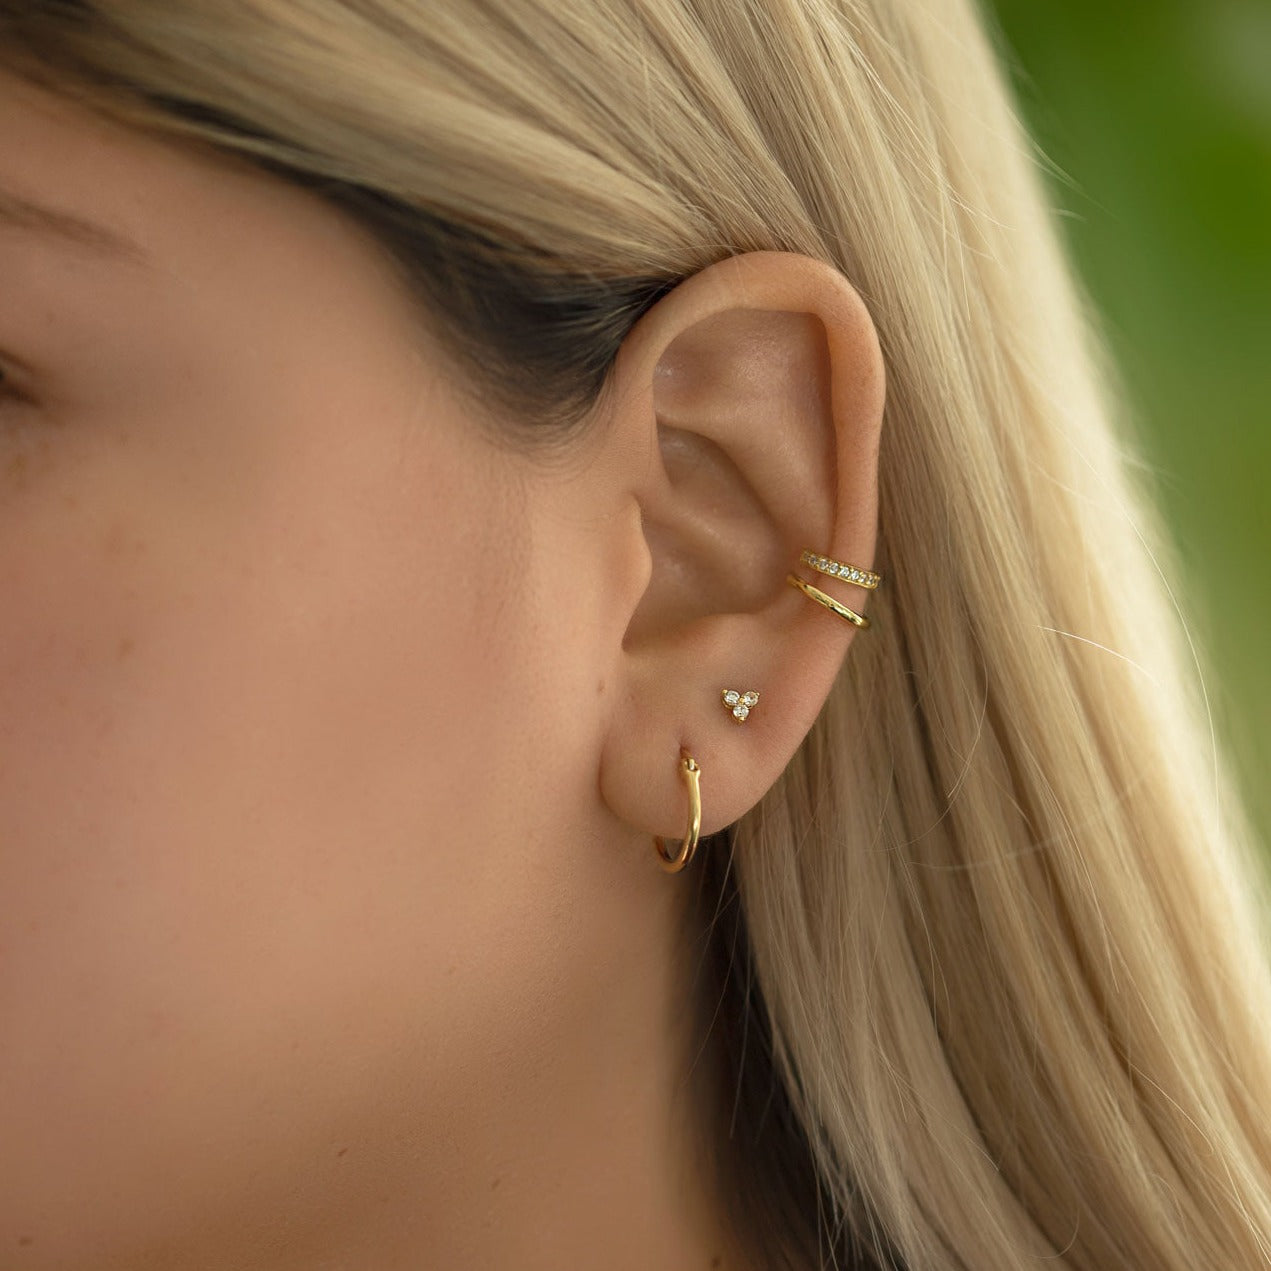 Curated Ear with Small Gold Hoop Earrings, Clover Stud Earring, Eternity and Pave Ear Cuff